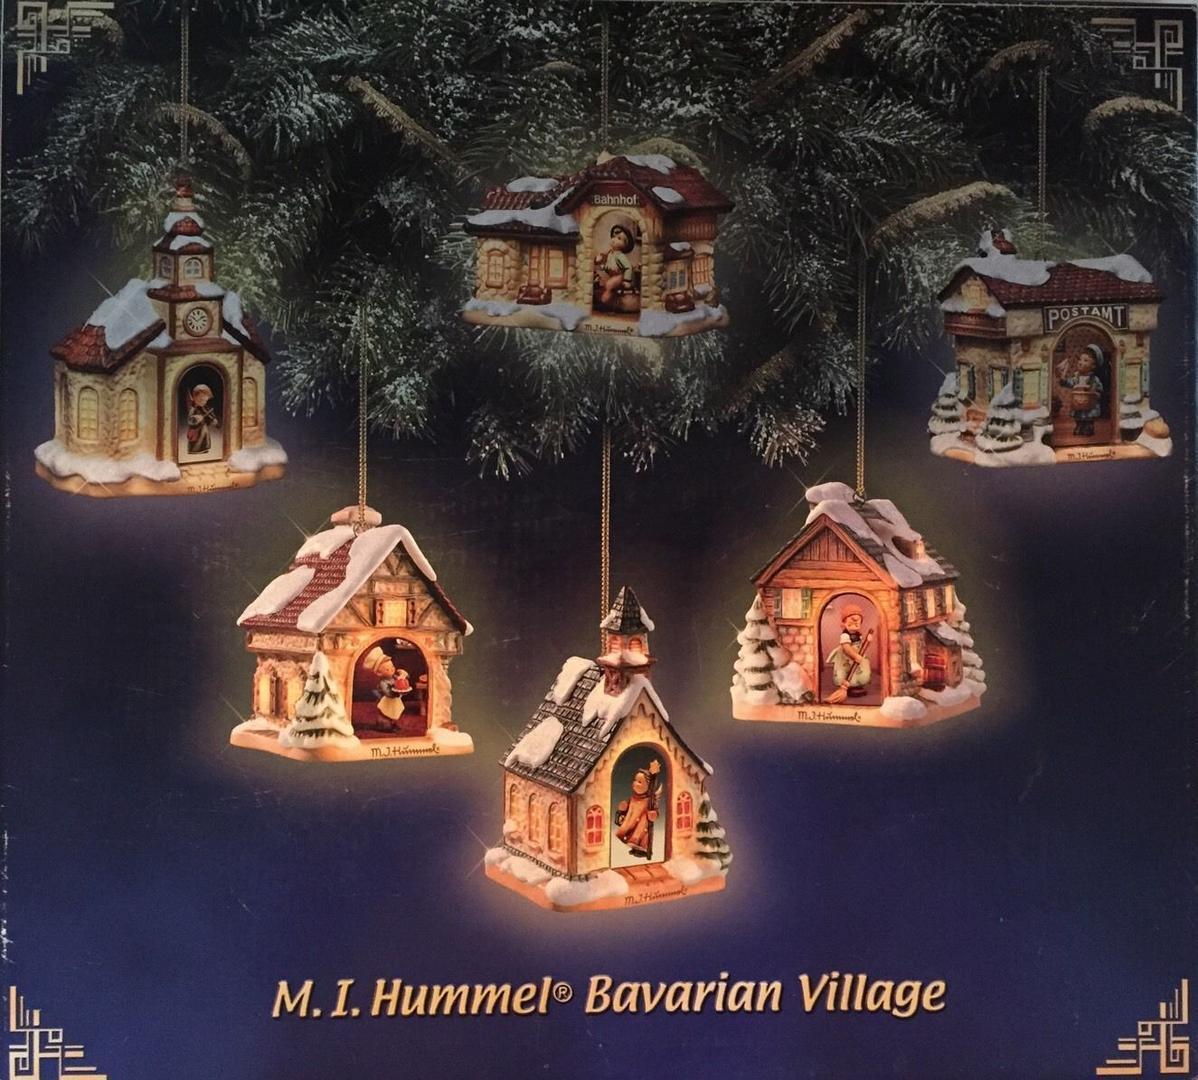 Primary image for M.I. Hummel Bavarian Village Bradford Editions Ornament Collection (You Pick)